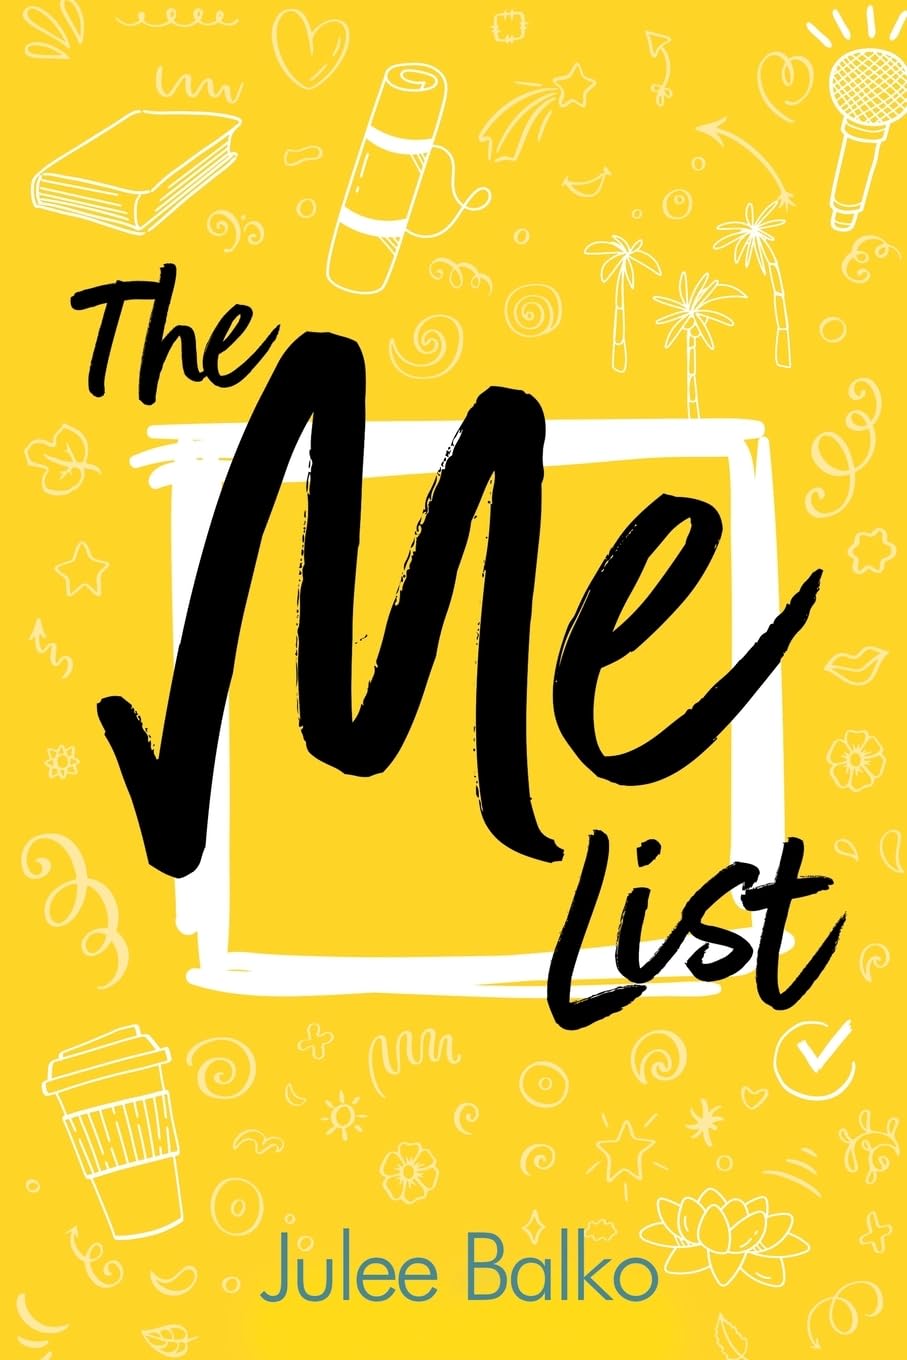 The Me List by Julee Balko